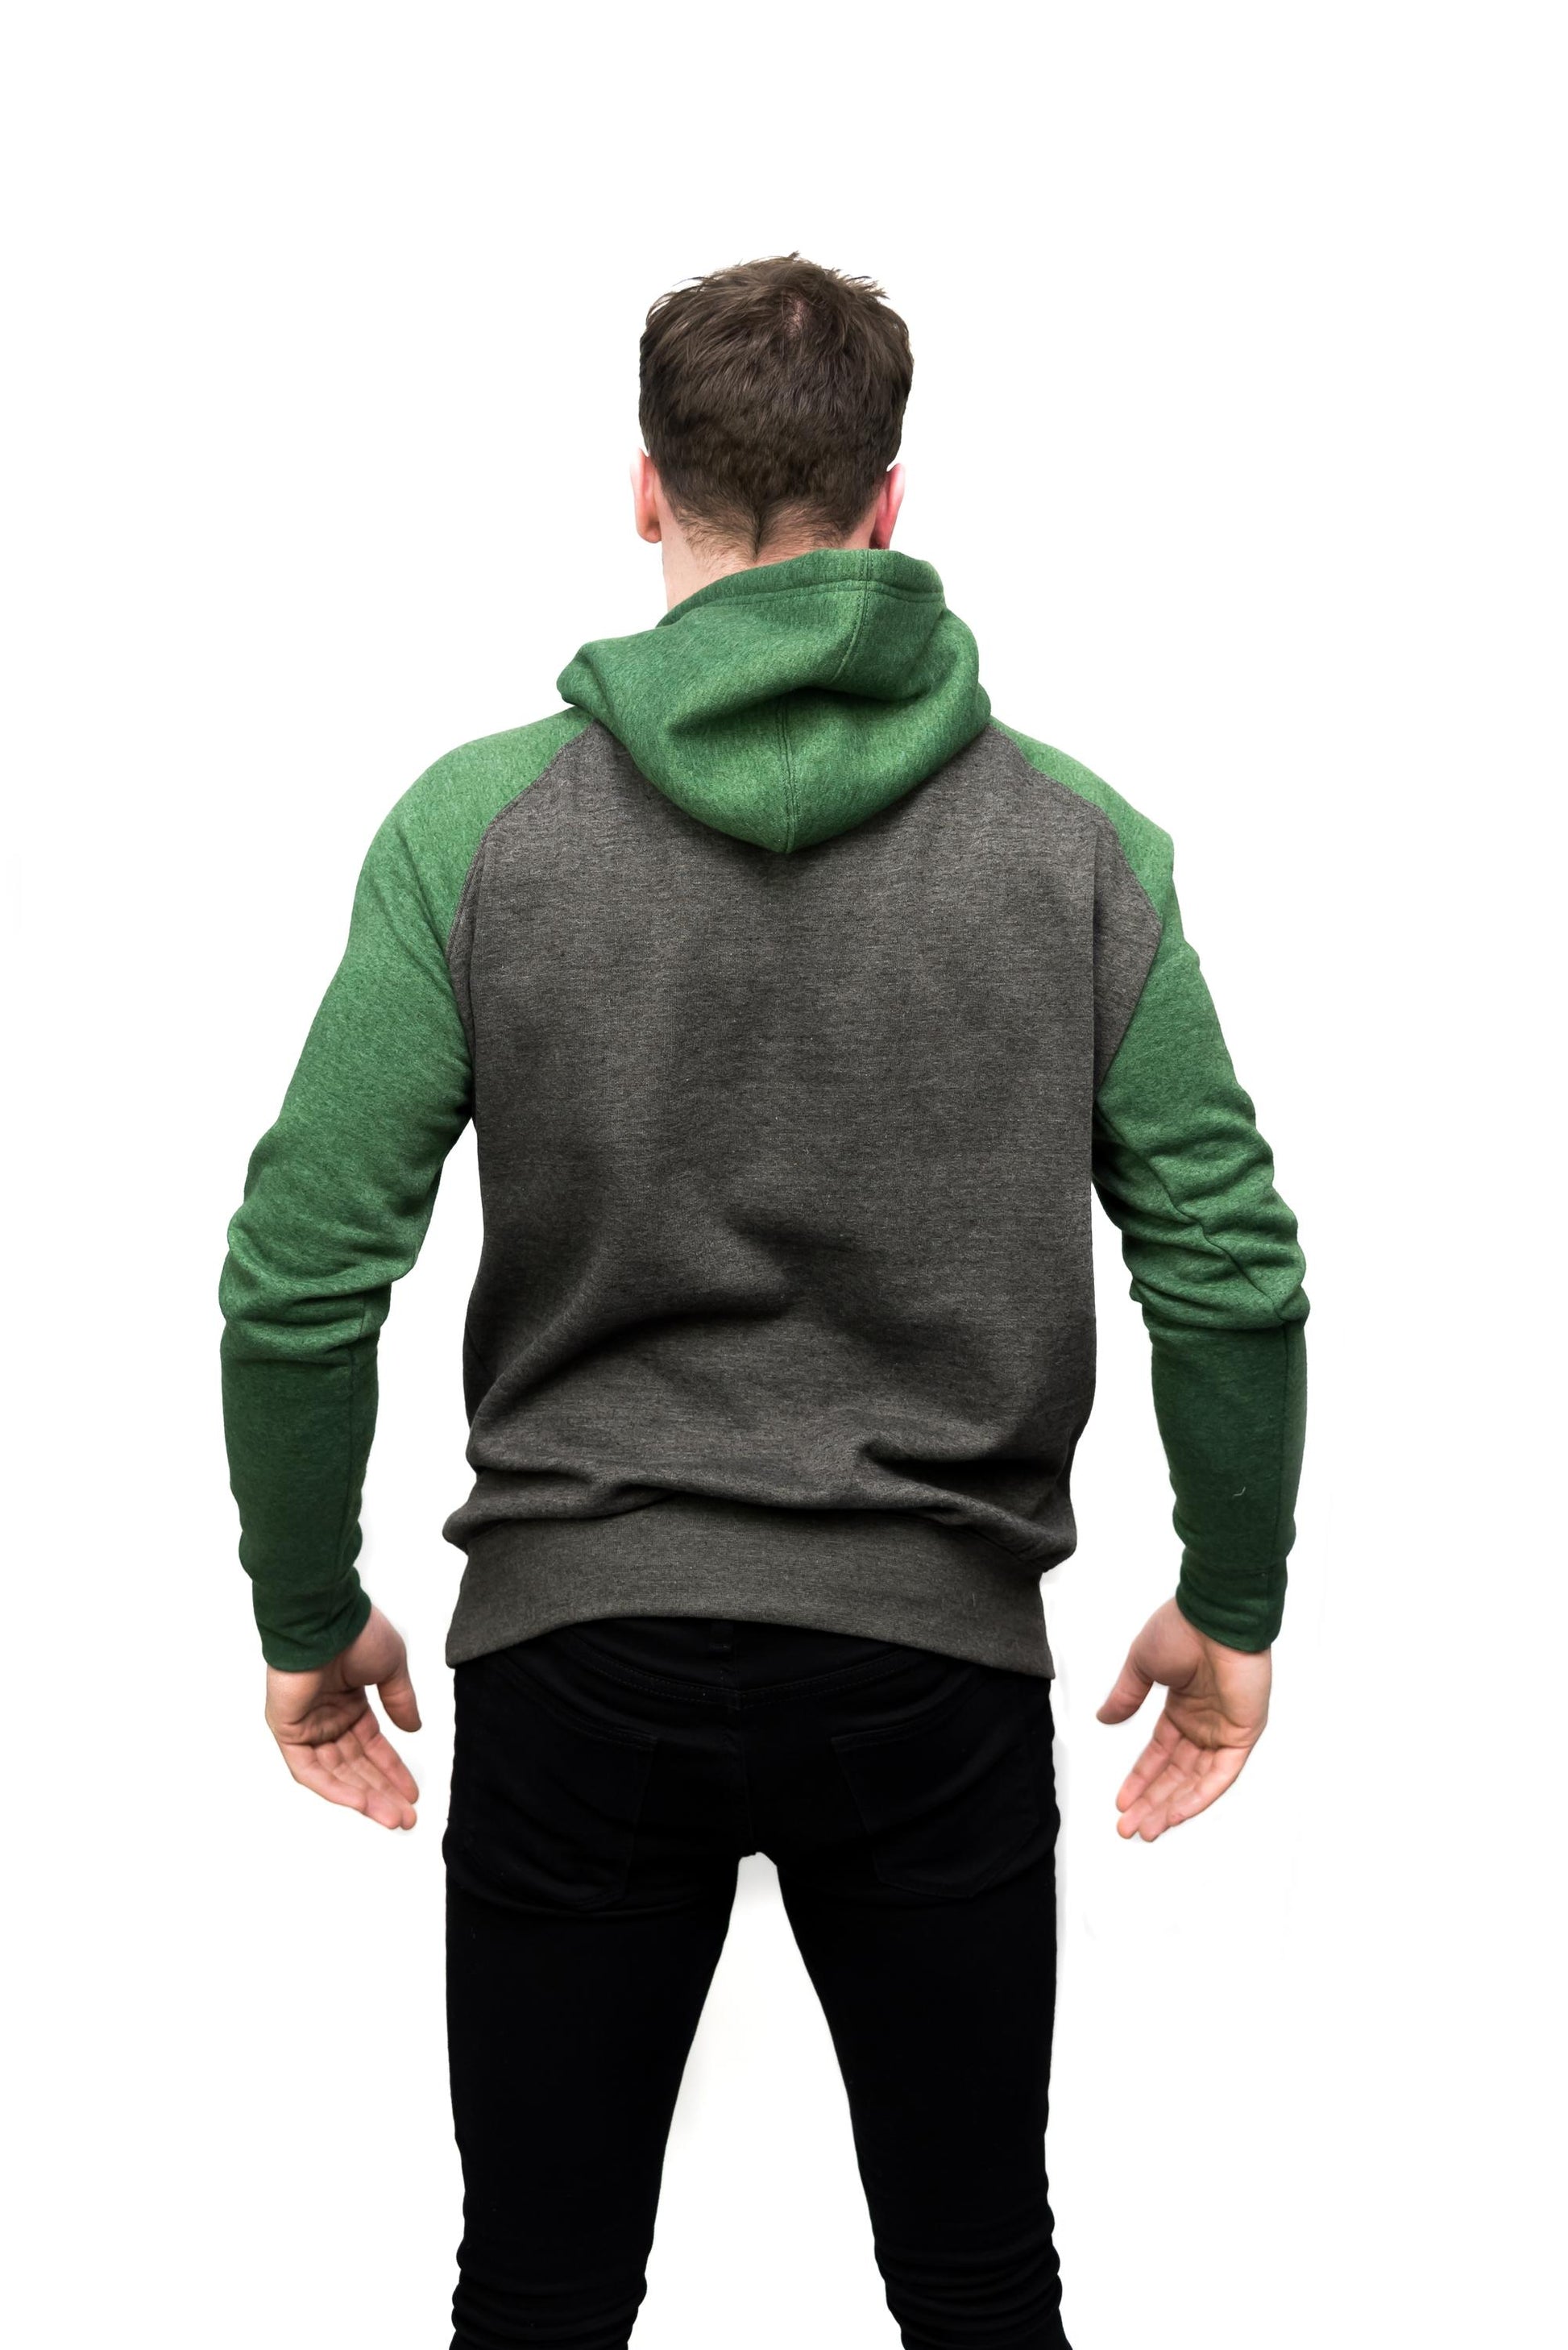 The back view of a man wearing a Guinness Grey and Green Hoodie.